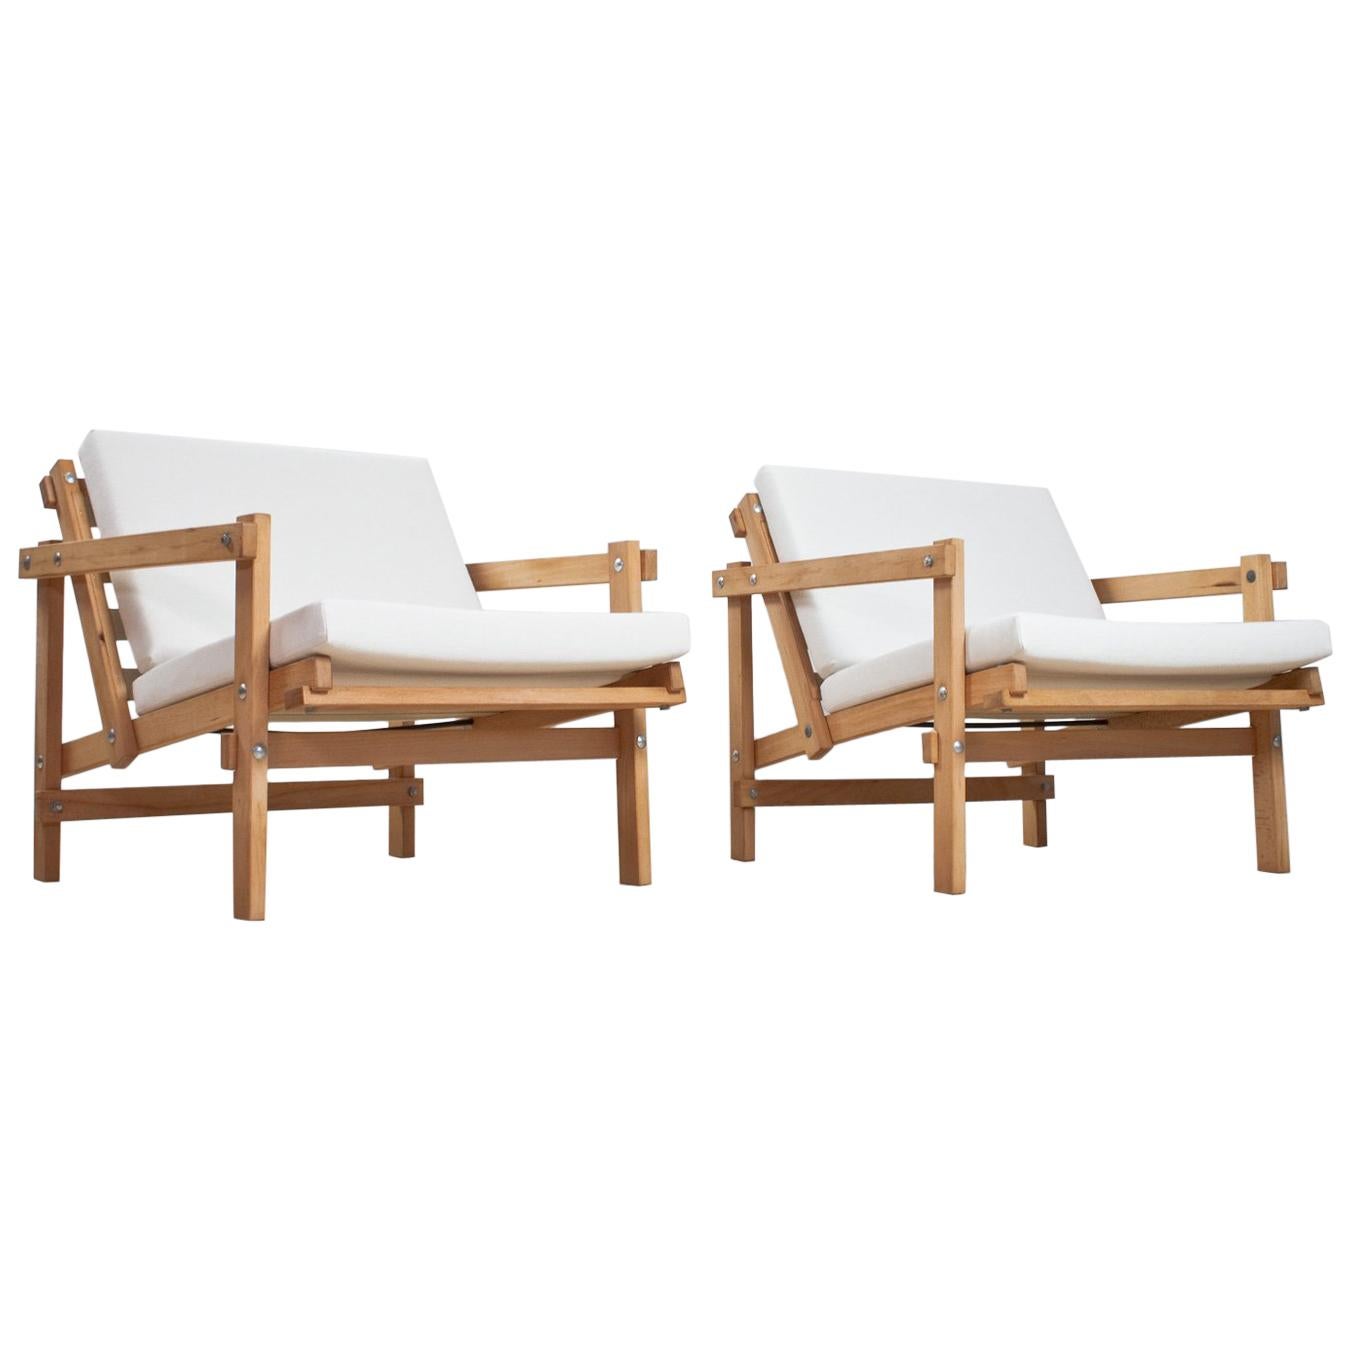 Modernist set of Lounge Chairs in Beech and White Linnen by Martin Visser 1970s